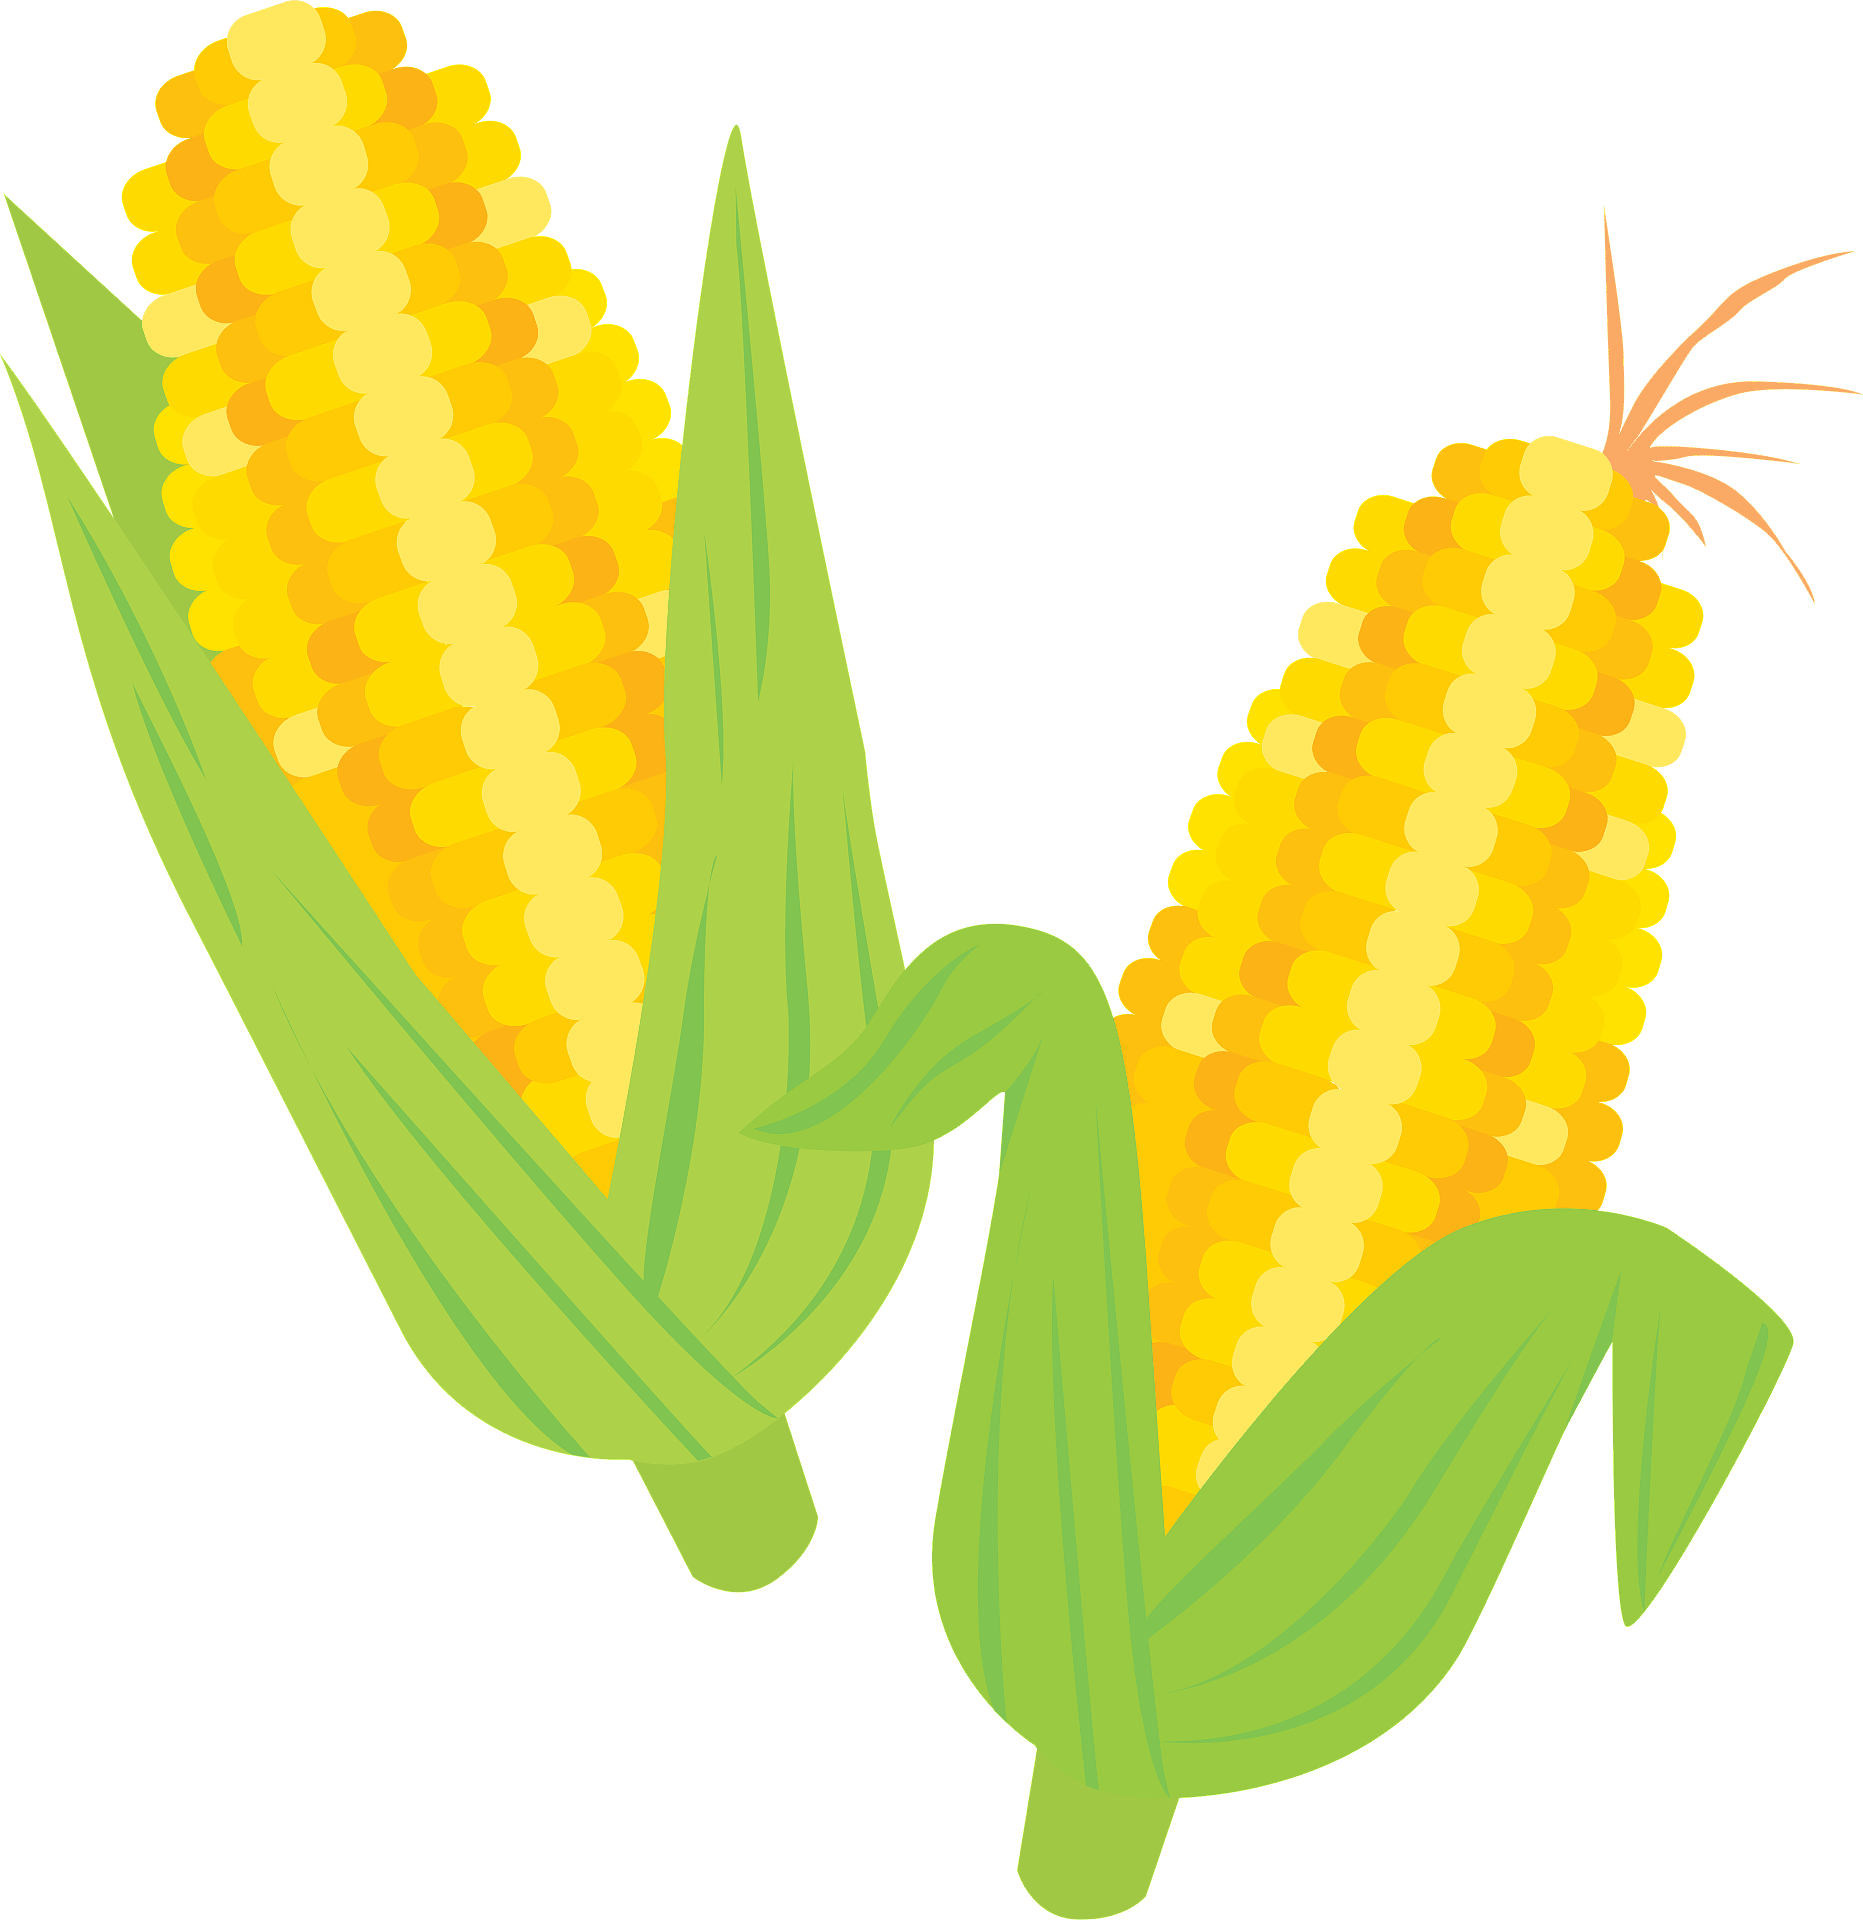 Maize Sweet Corn Ear Corn Soup Cereal PNG, Clipart, Agriculture - Clip ...